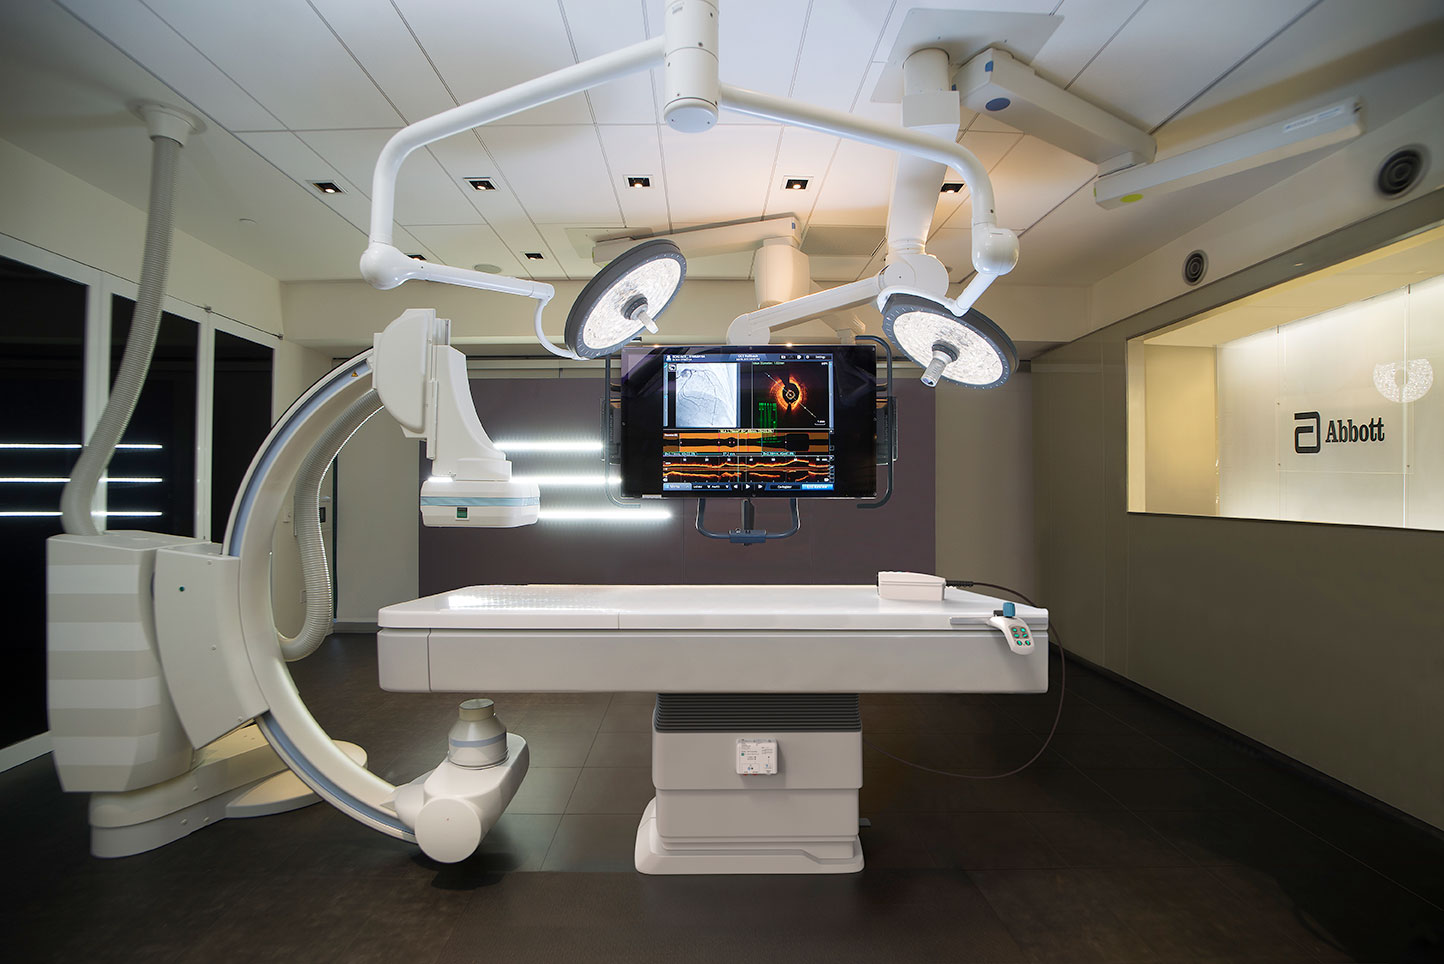 OPTIS Integrated System is integrated into a cath lab, so no set-up time is needed to perform cardiac cath lab imaging.